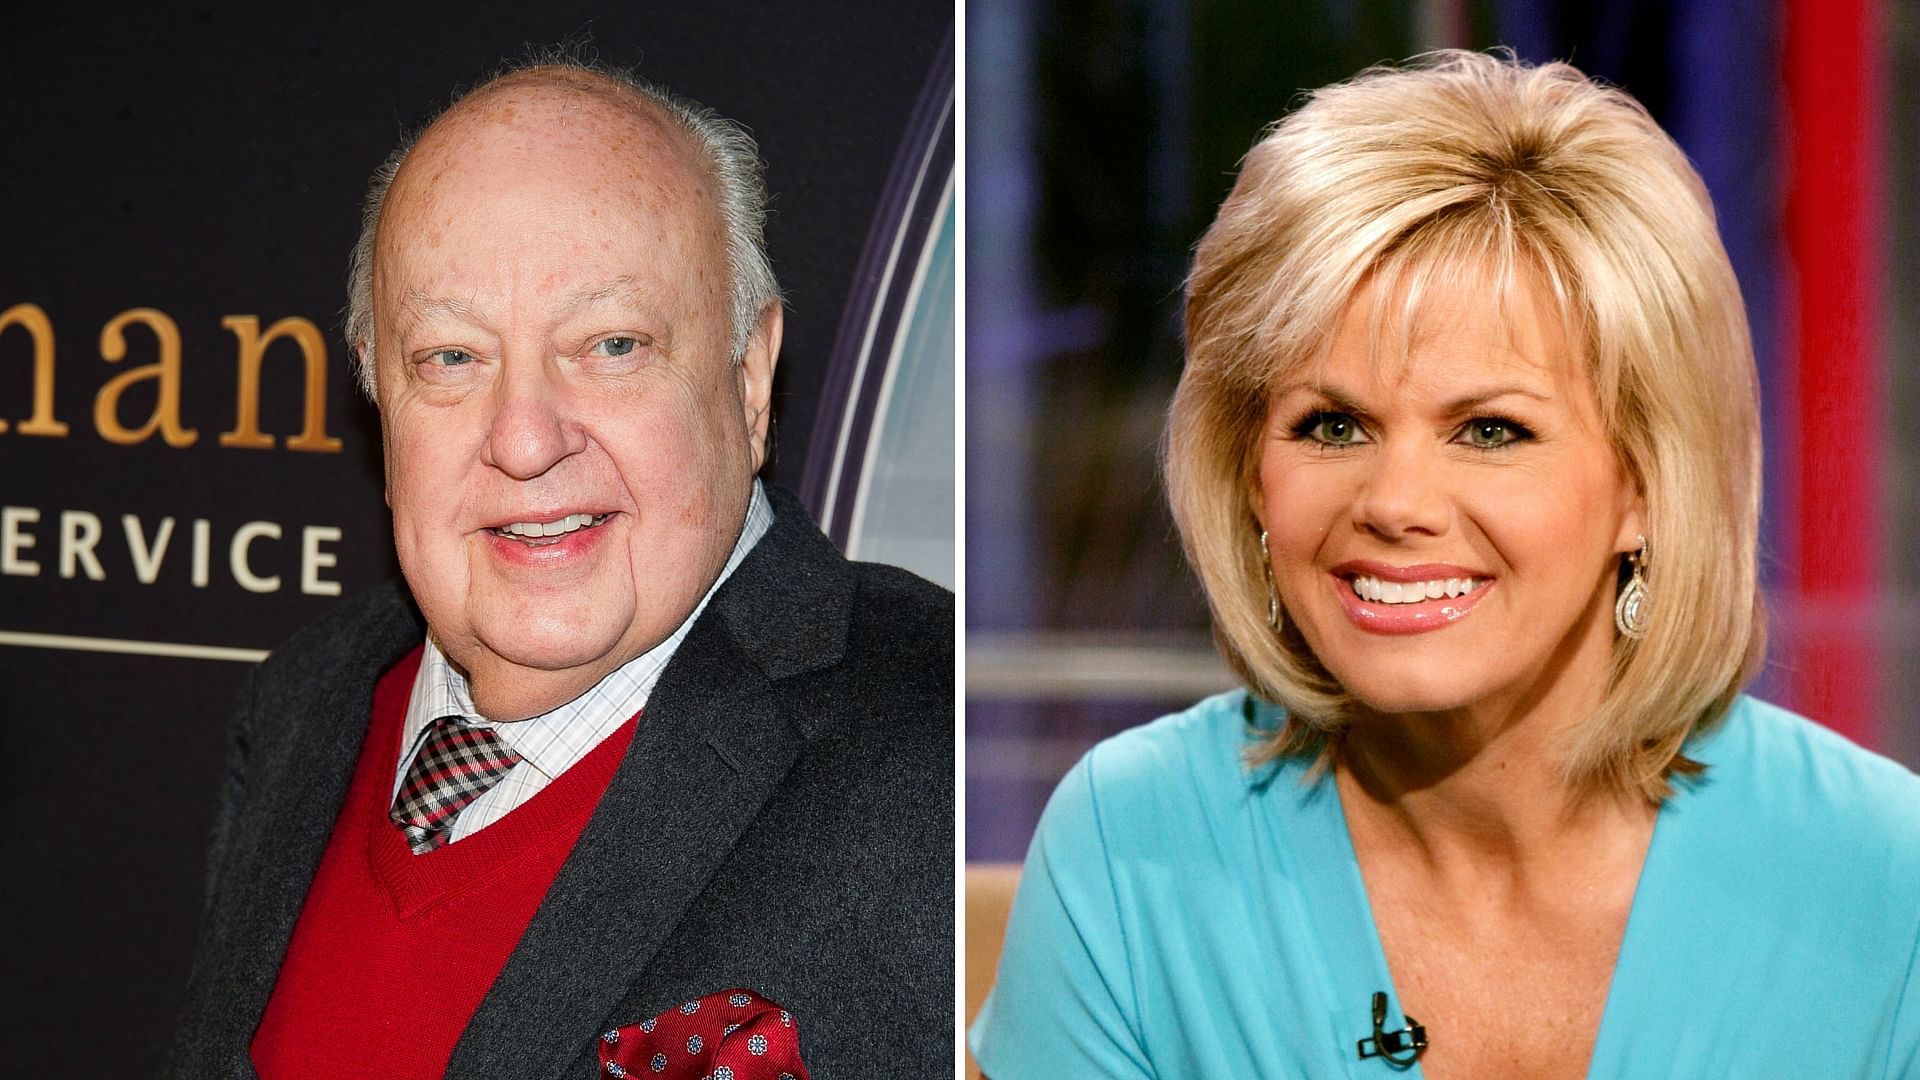 Fox News Chief Roger Ailes (L) and Fox News anchor Gretchen Carlson (R). (Photo: AP/Altered by <b>The Quint</b>)